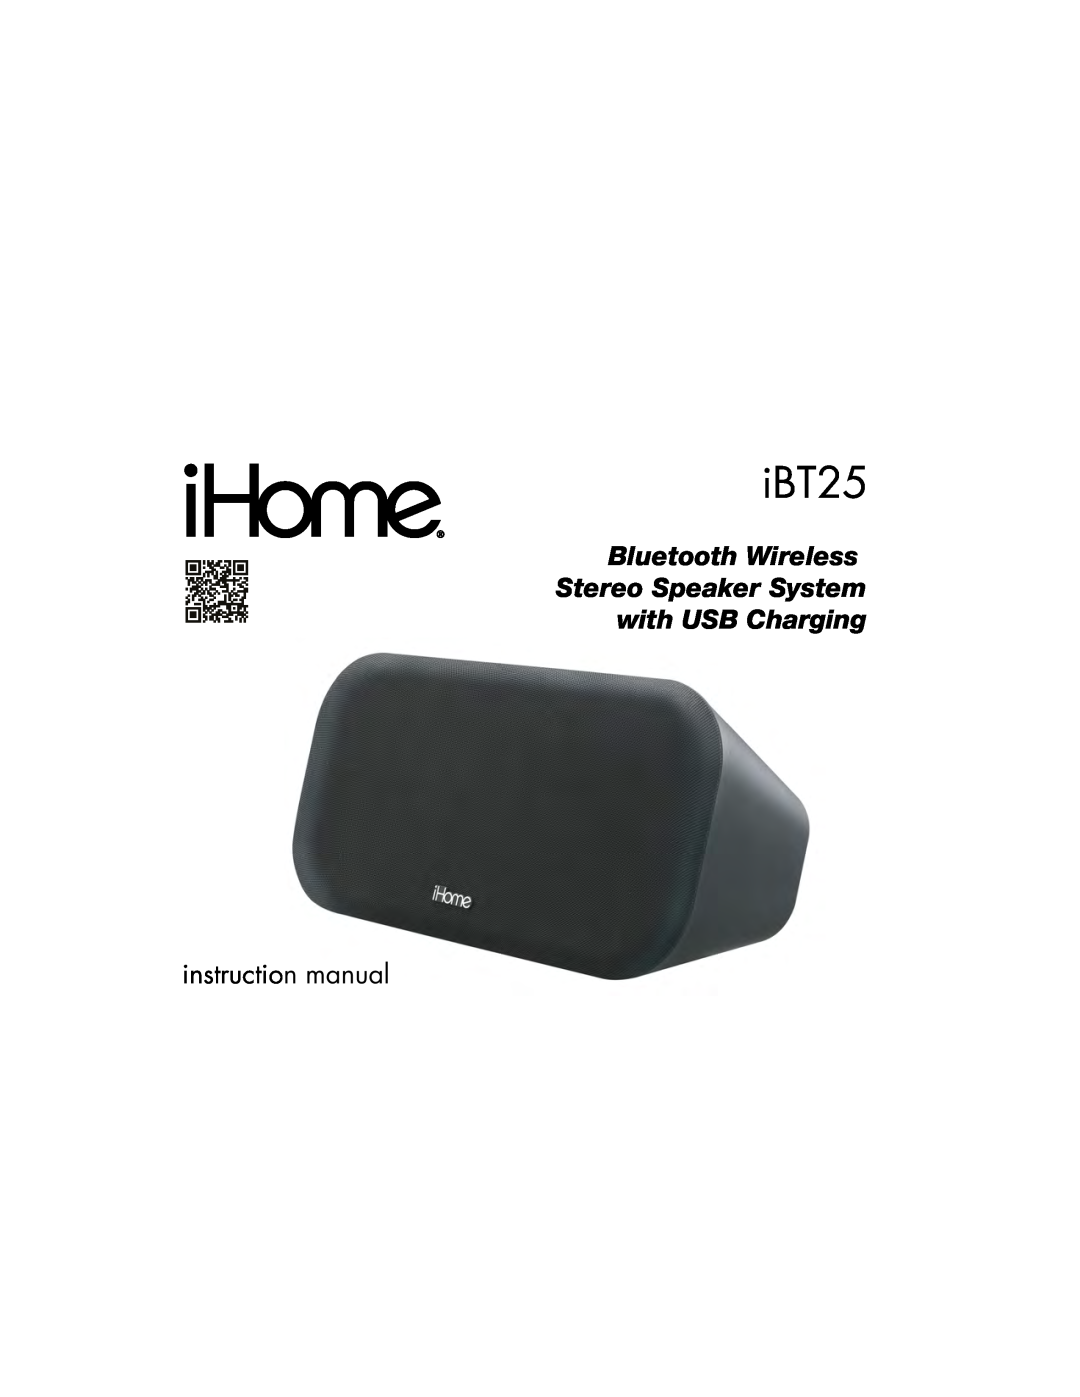 iHome IBT25BC instruction manual iBT25, Bluetooth Wireless Stereo Speaker System, with USB Charging 